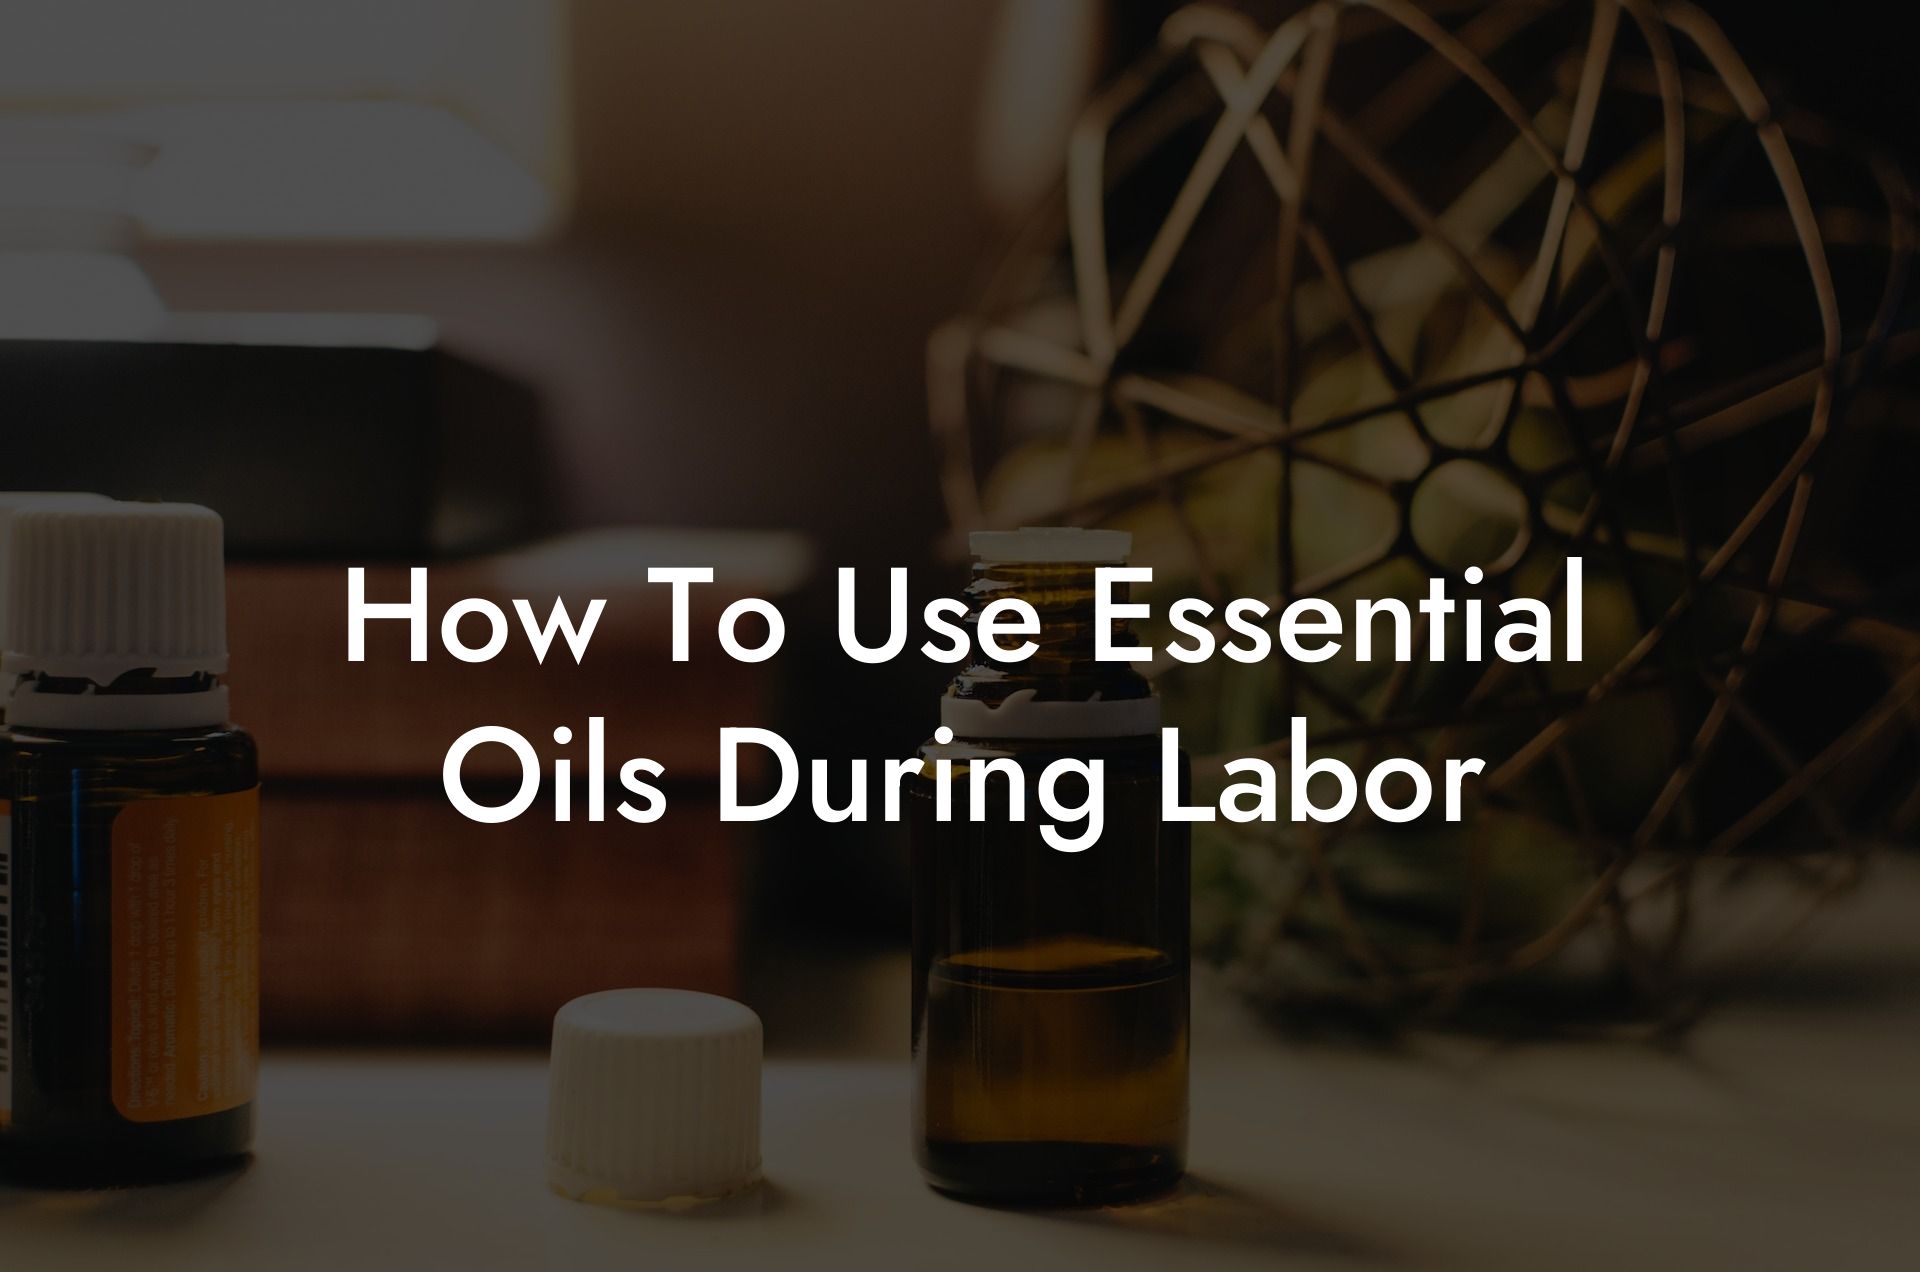 How To Use Essential Oils During Labor